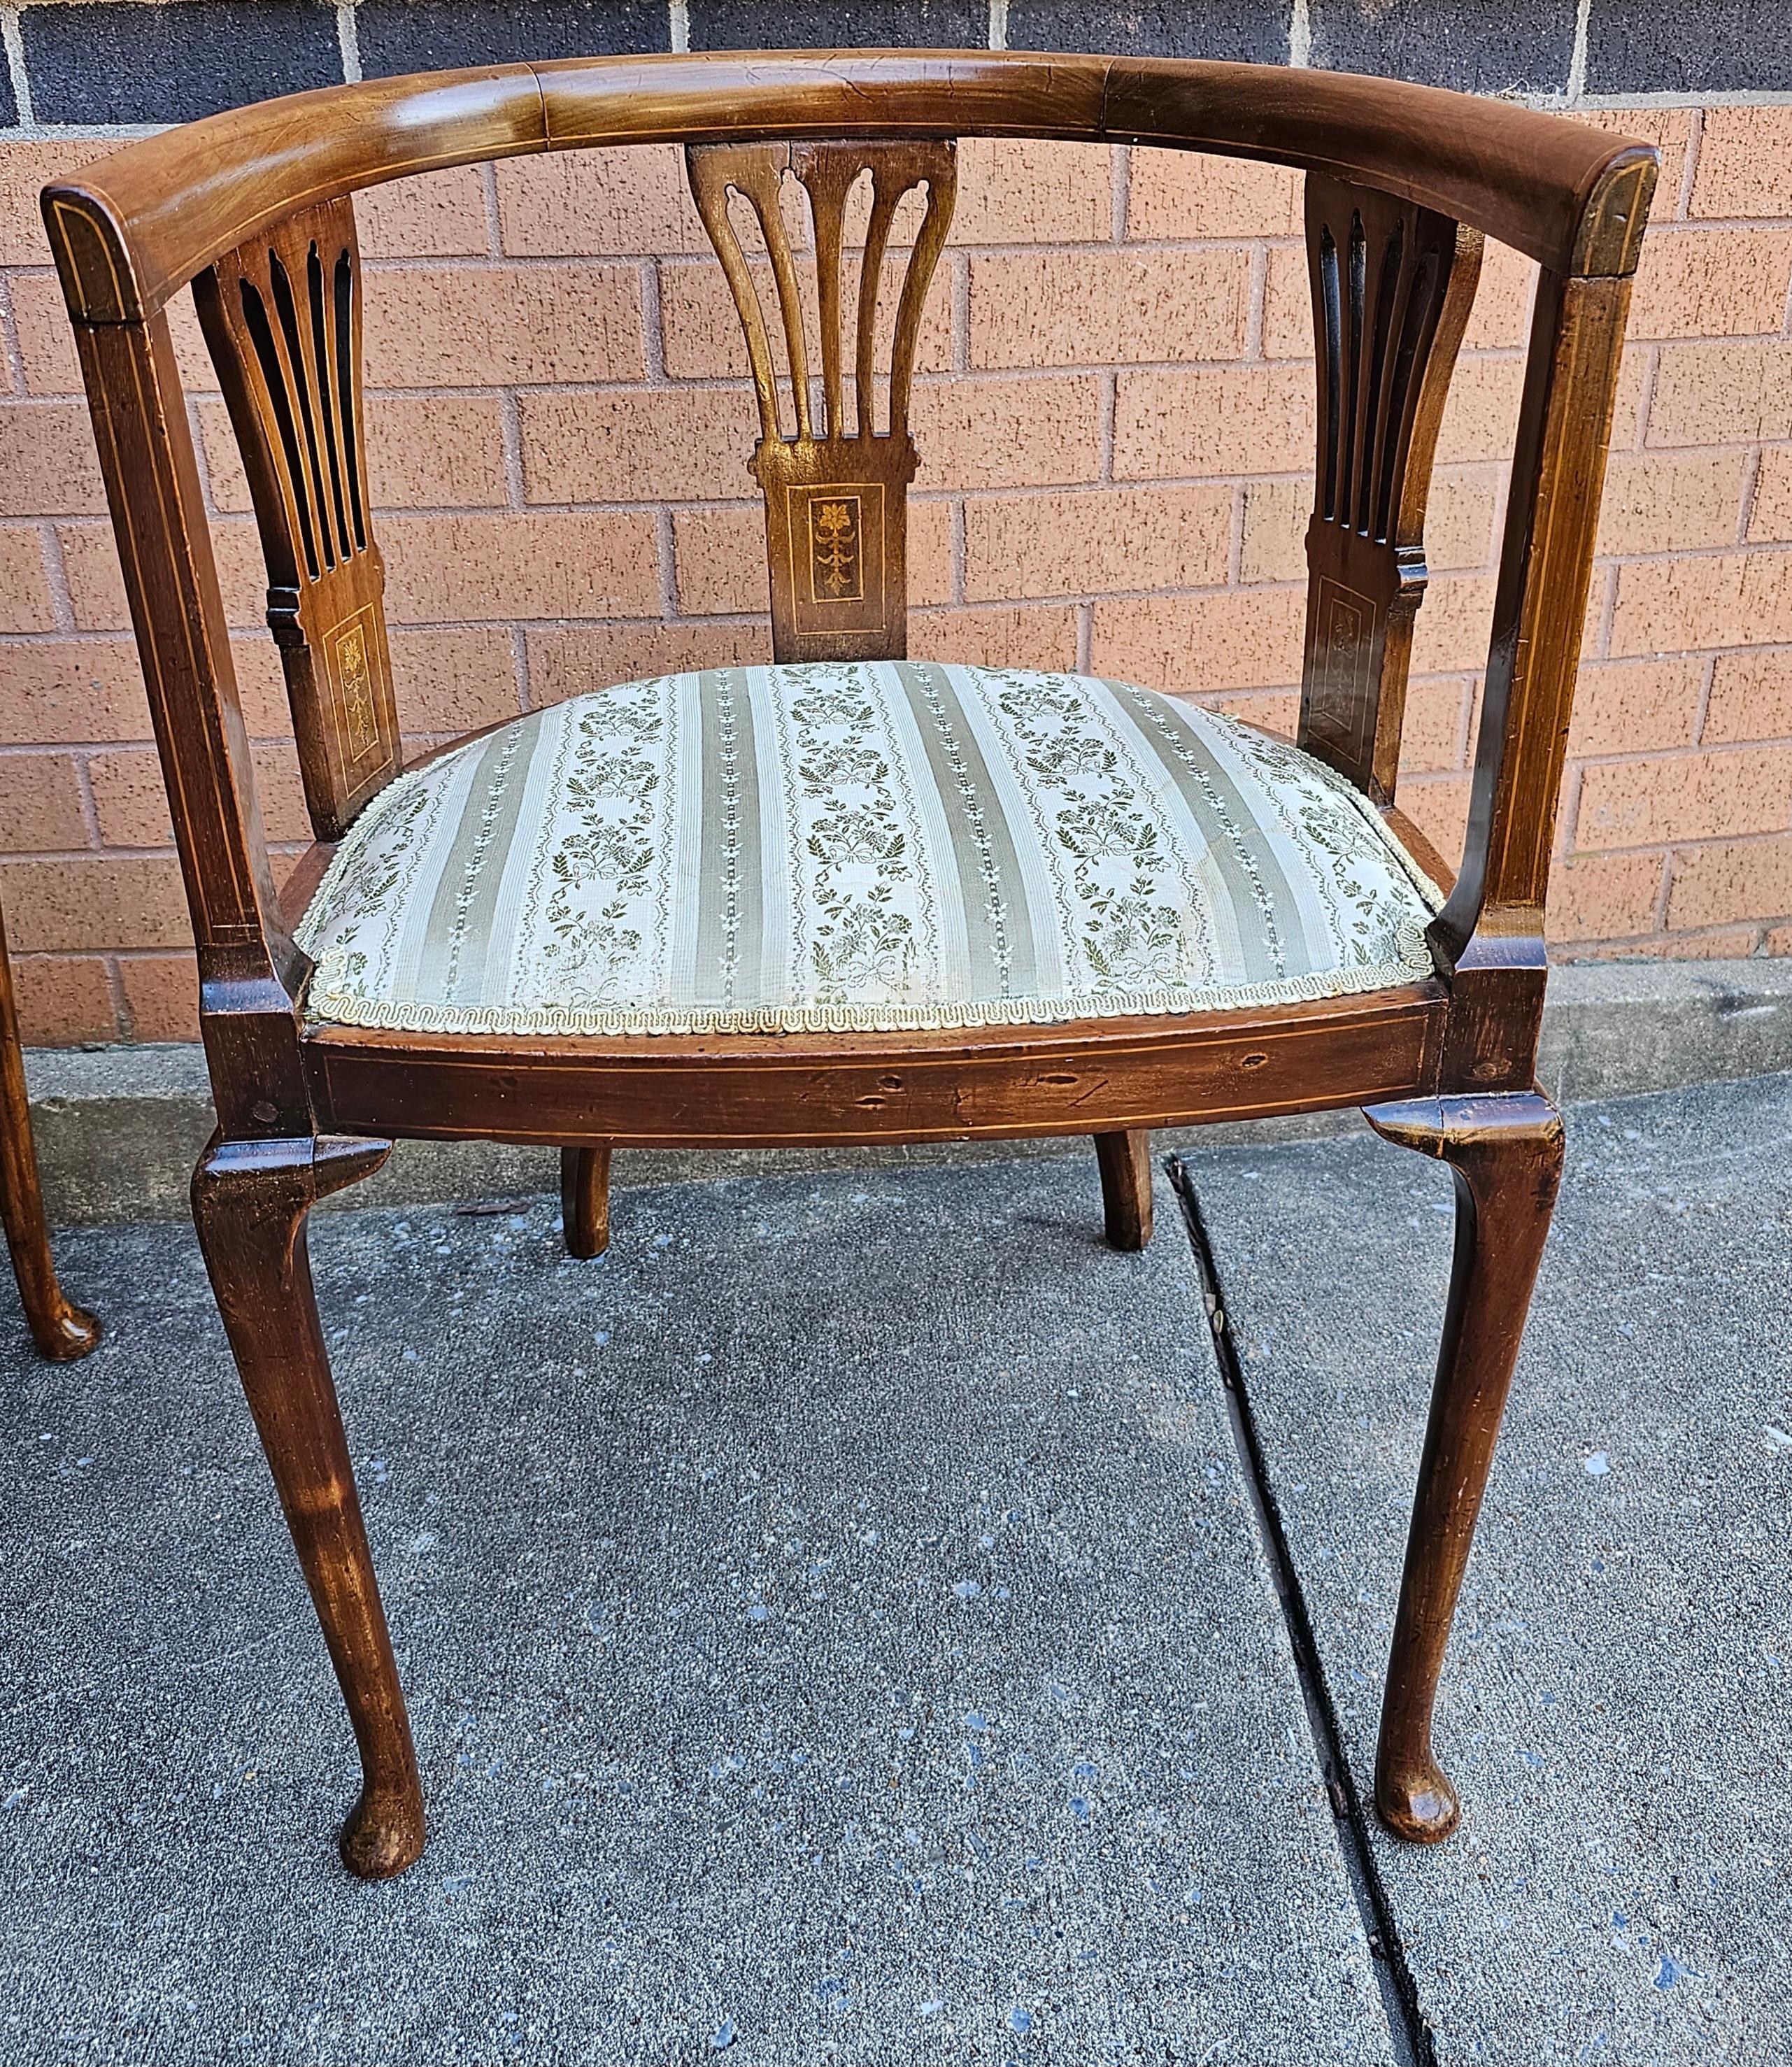 Edwardian Satinwood Inlaid Mahogany Barrel-Back Upholstered Club Armchairs, Pair In Good Condition For Sale In Germantown, MD